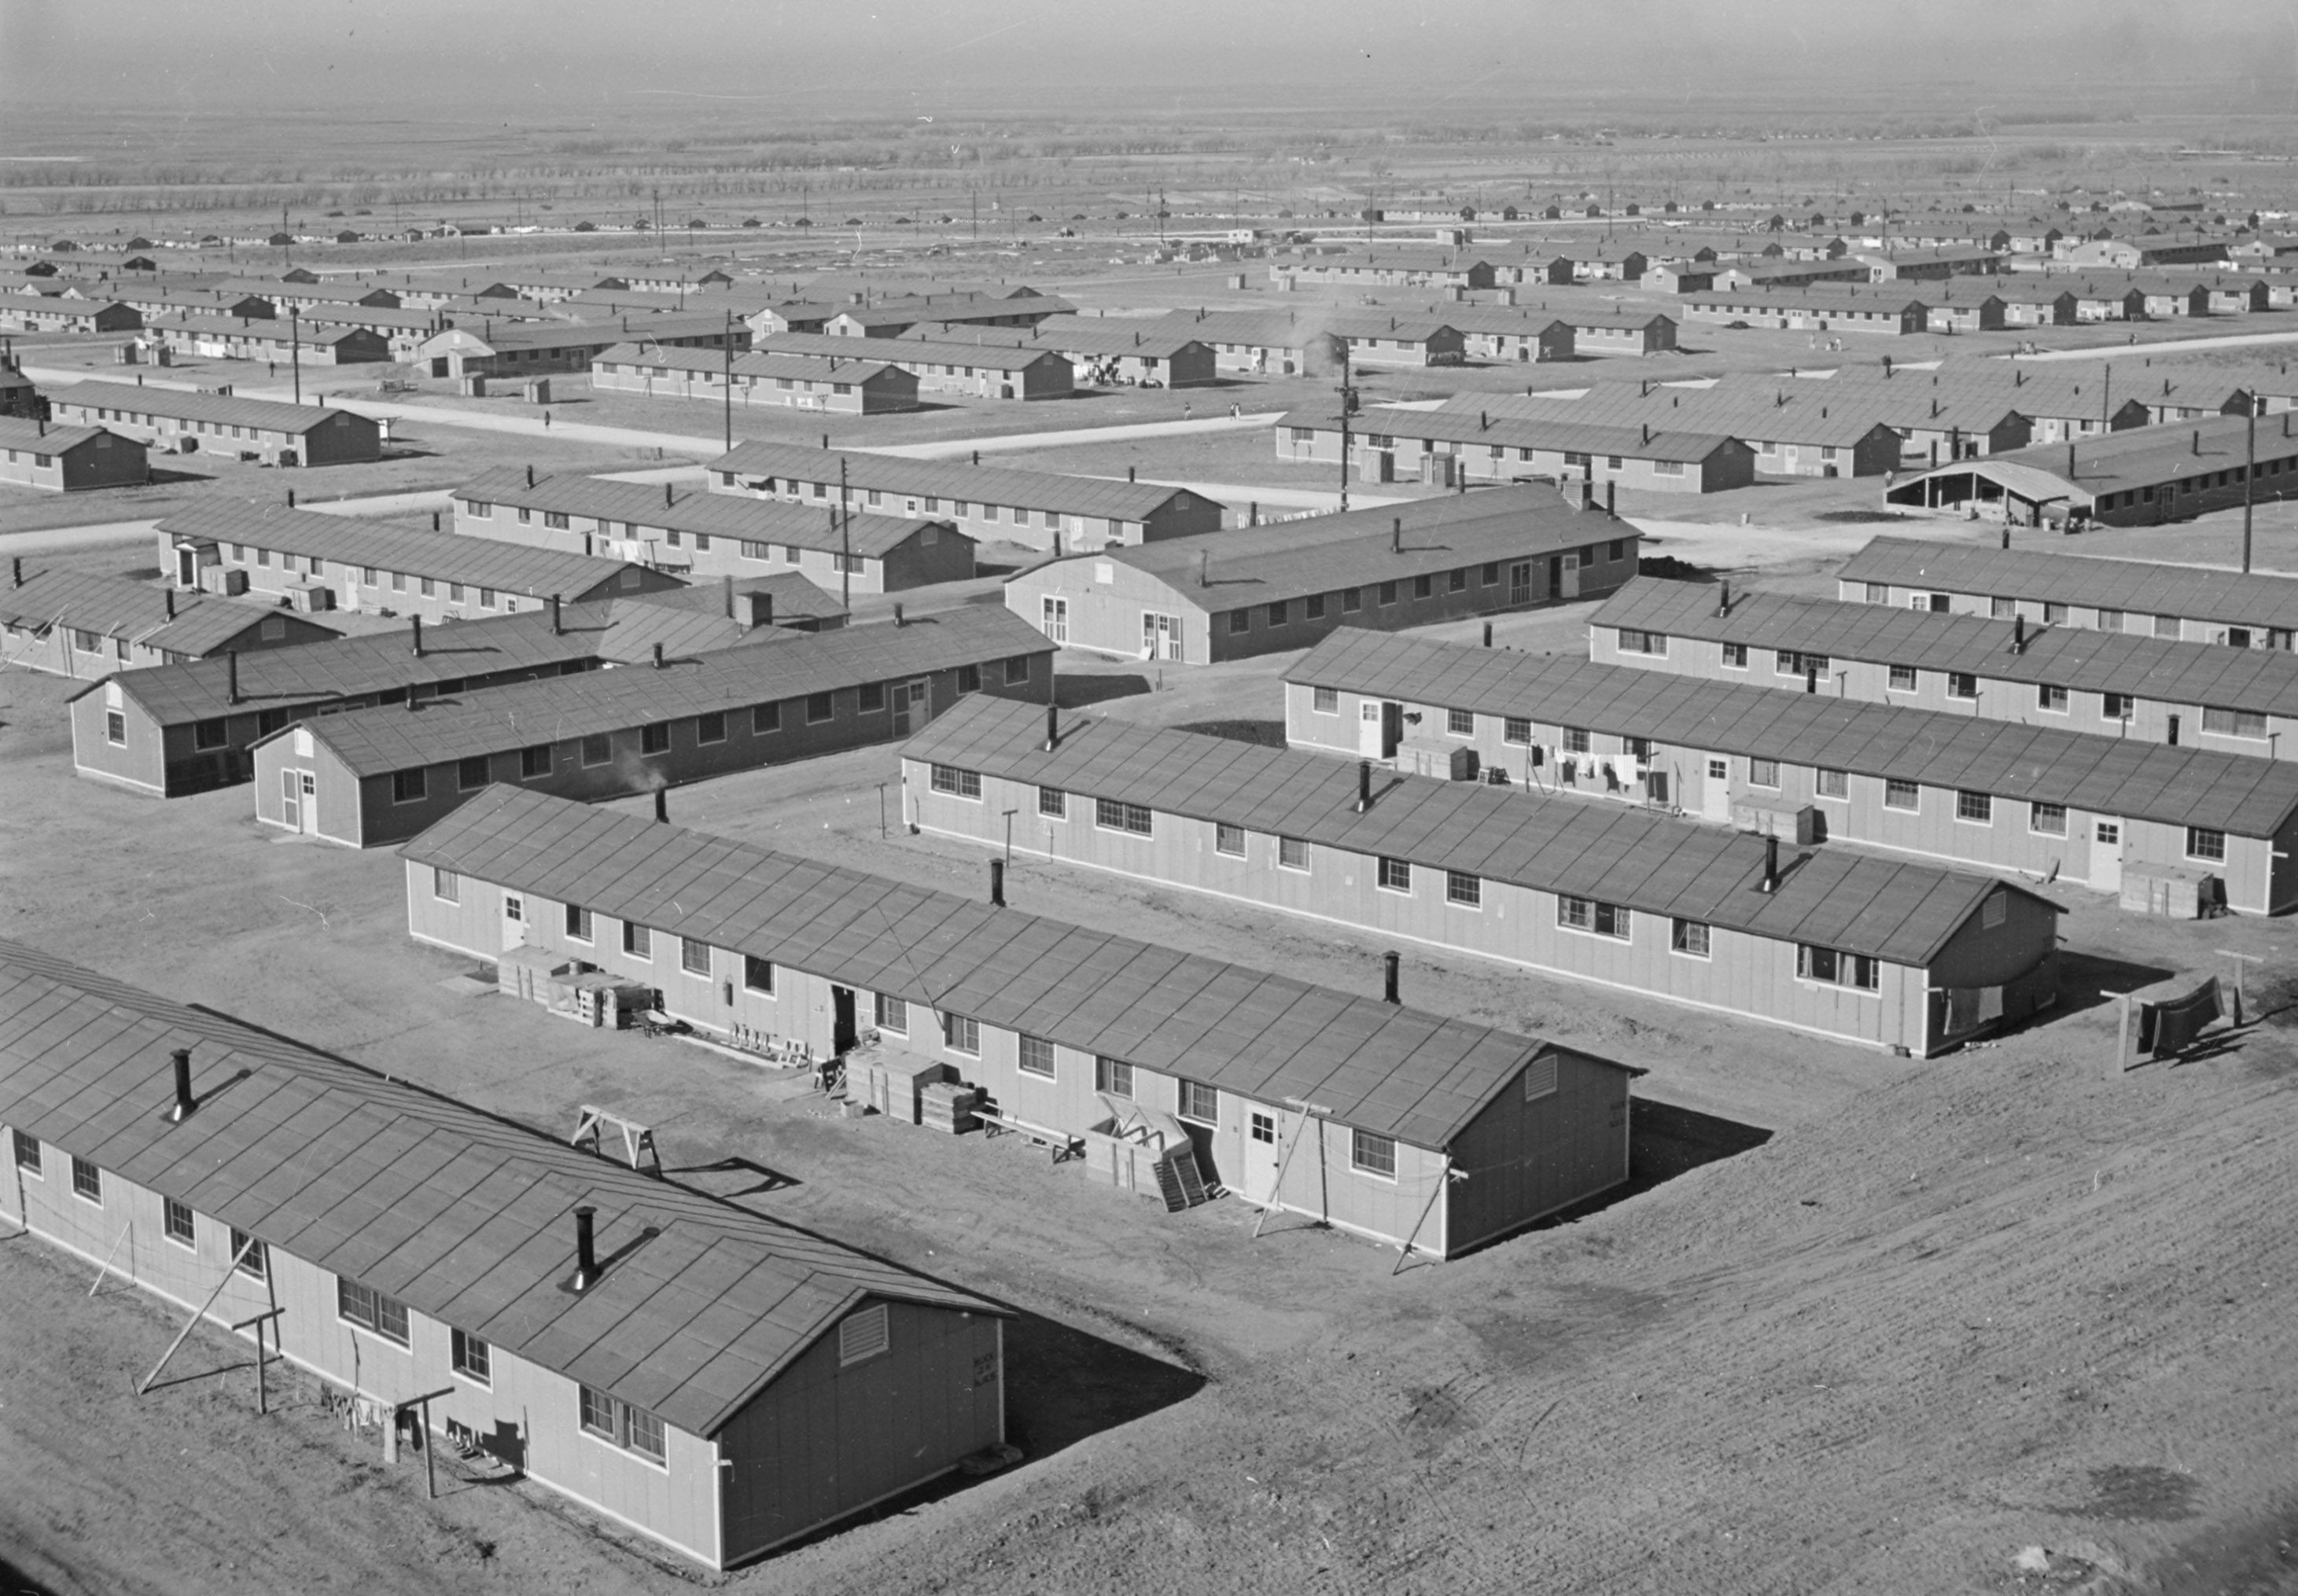 Black and white photo of rows and rows of low, bare, one-story buildings.